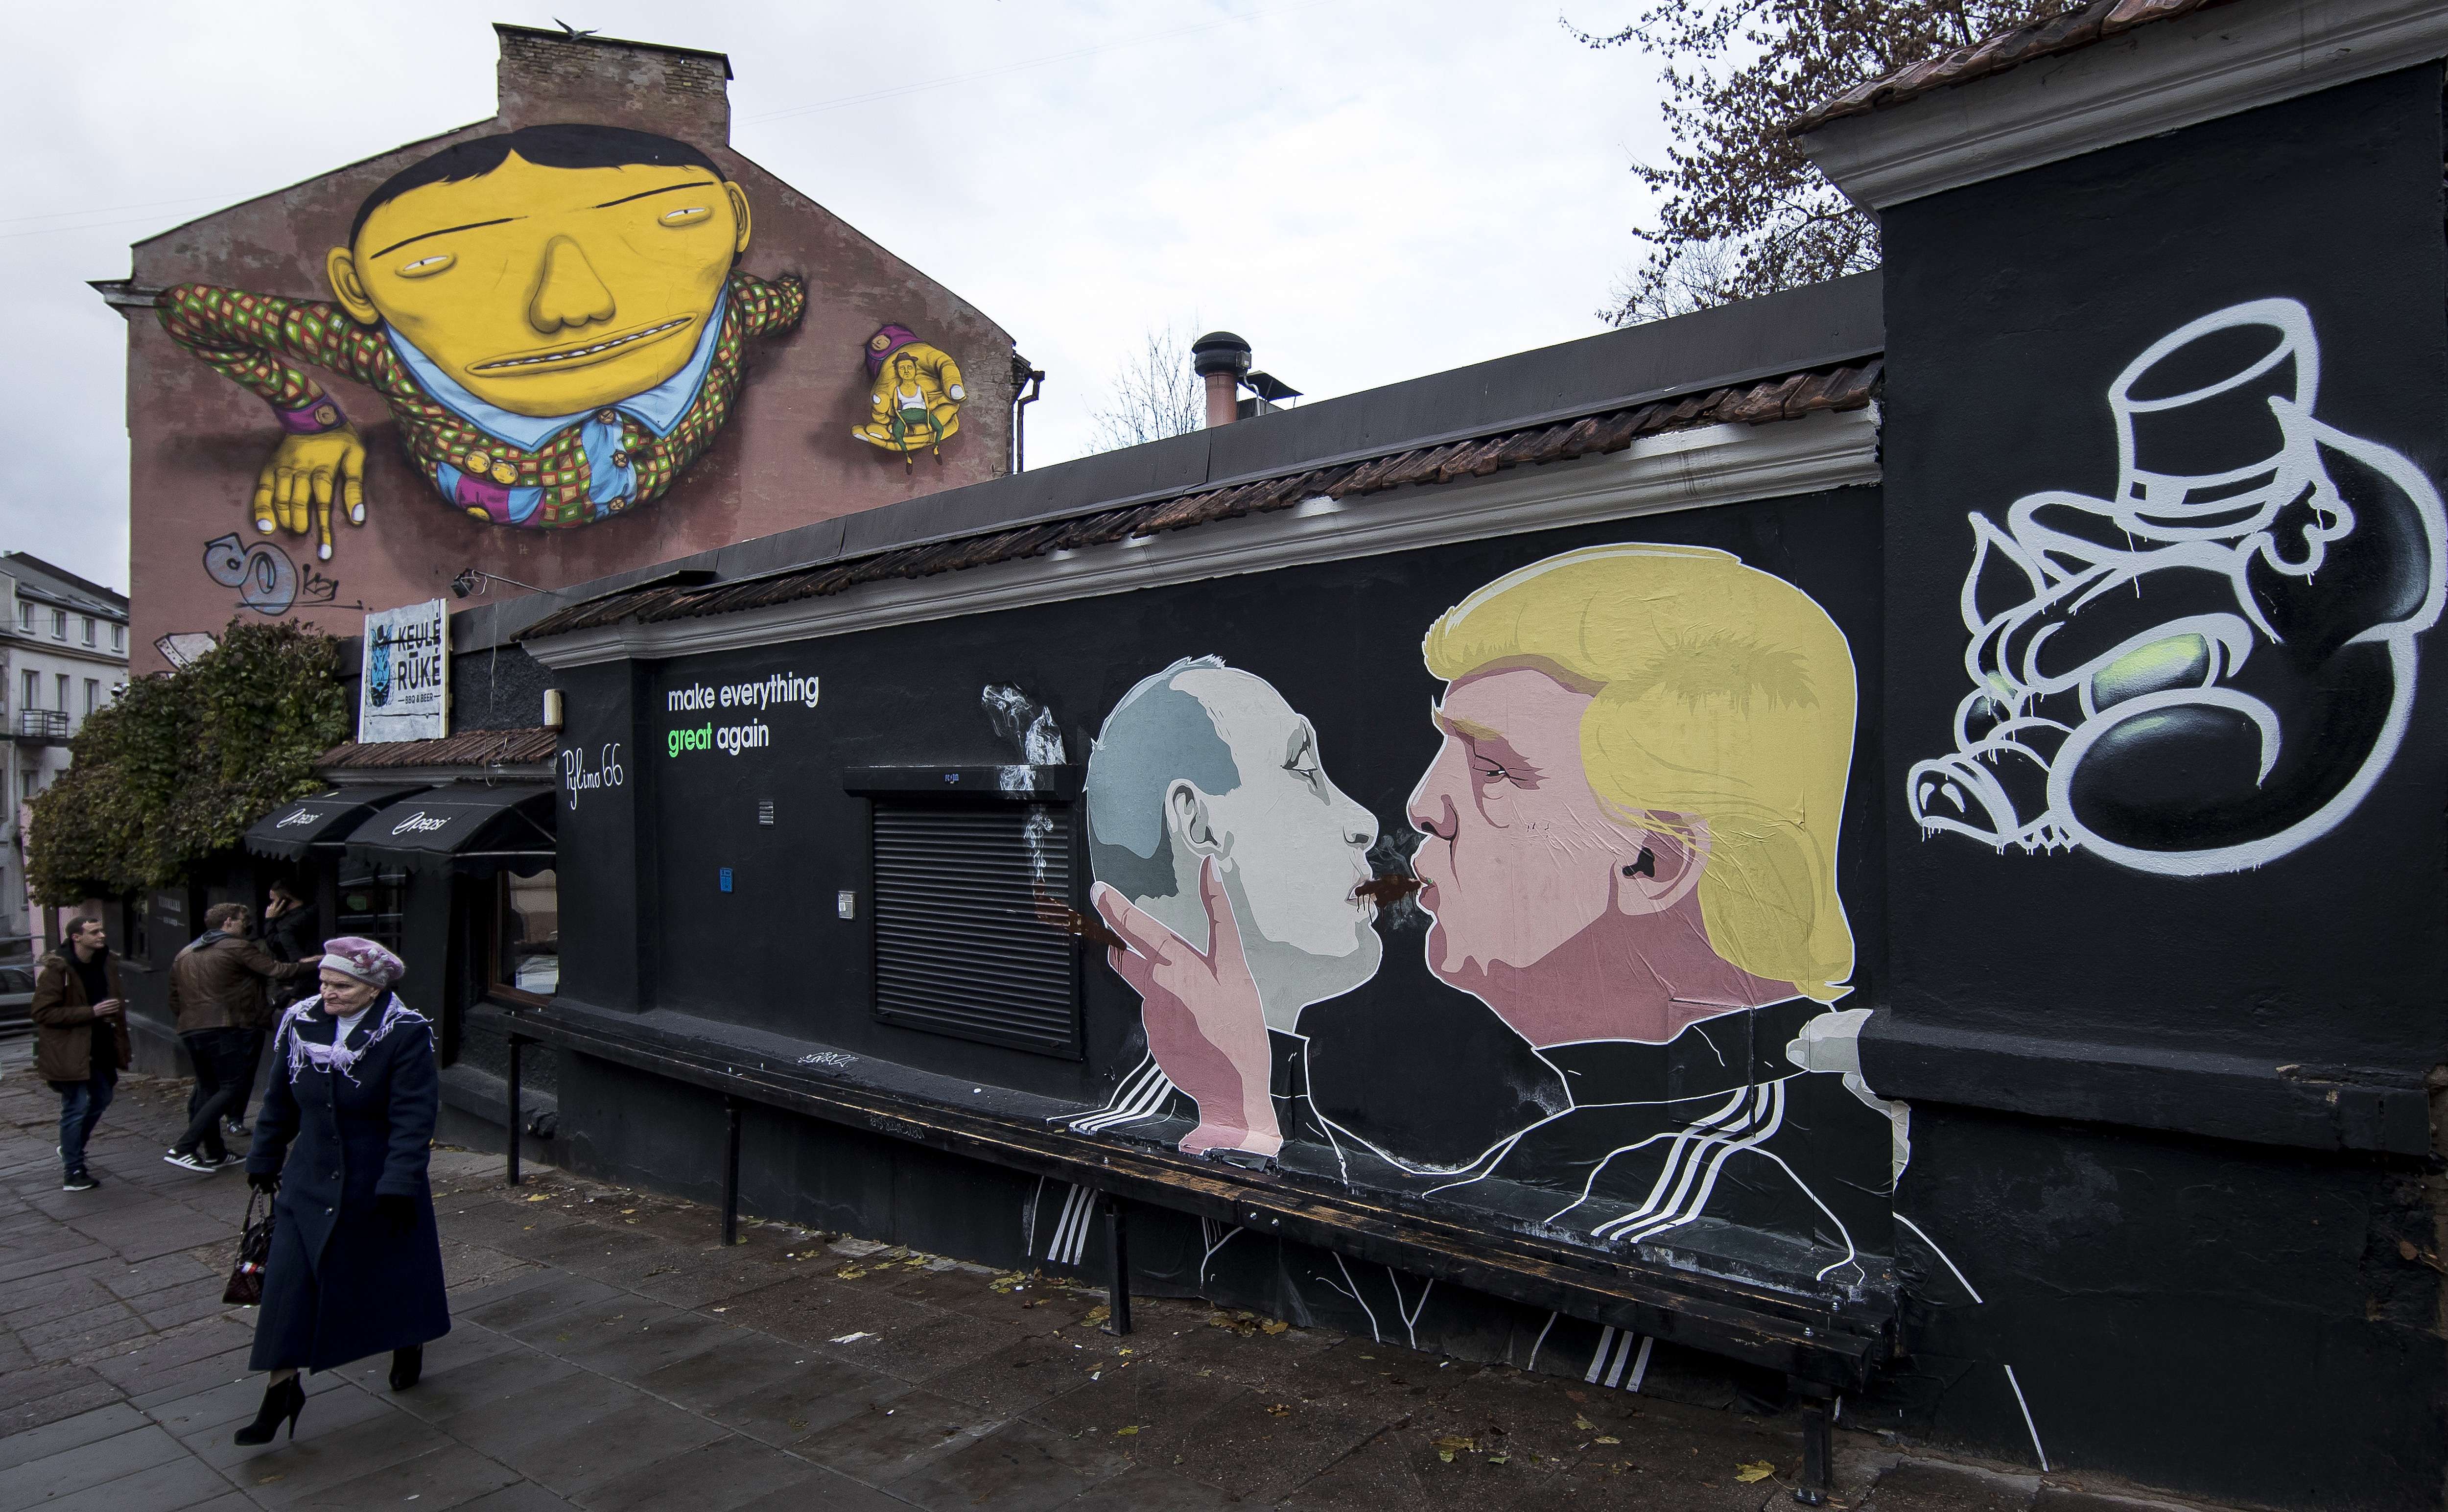 Graffiti artwork depicts Russian President Vladimir Putin and then Republican presidential candidate Donald Trump outside a bar in the old town in Vilnius, Lithuania, on October 30. Photo: AP